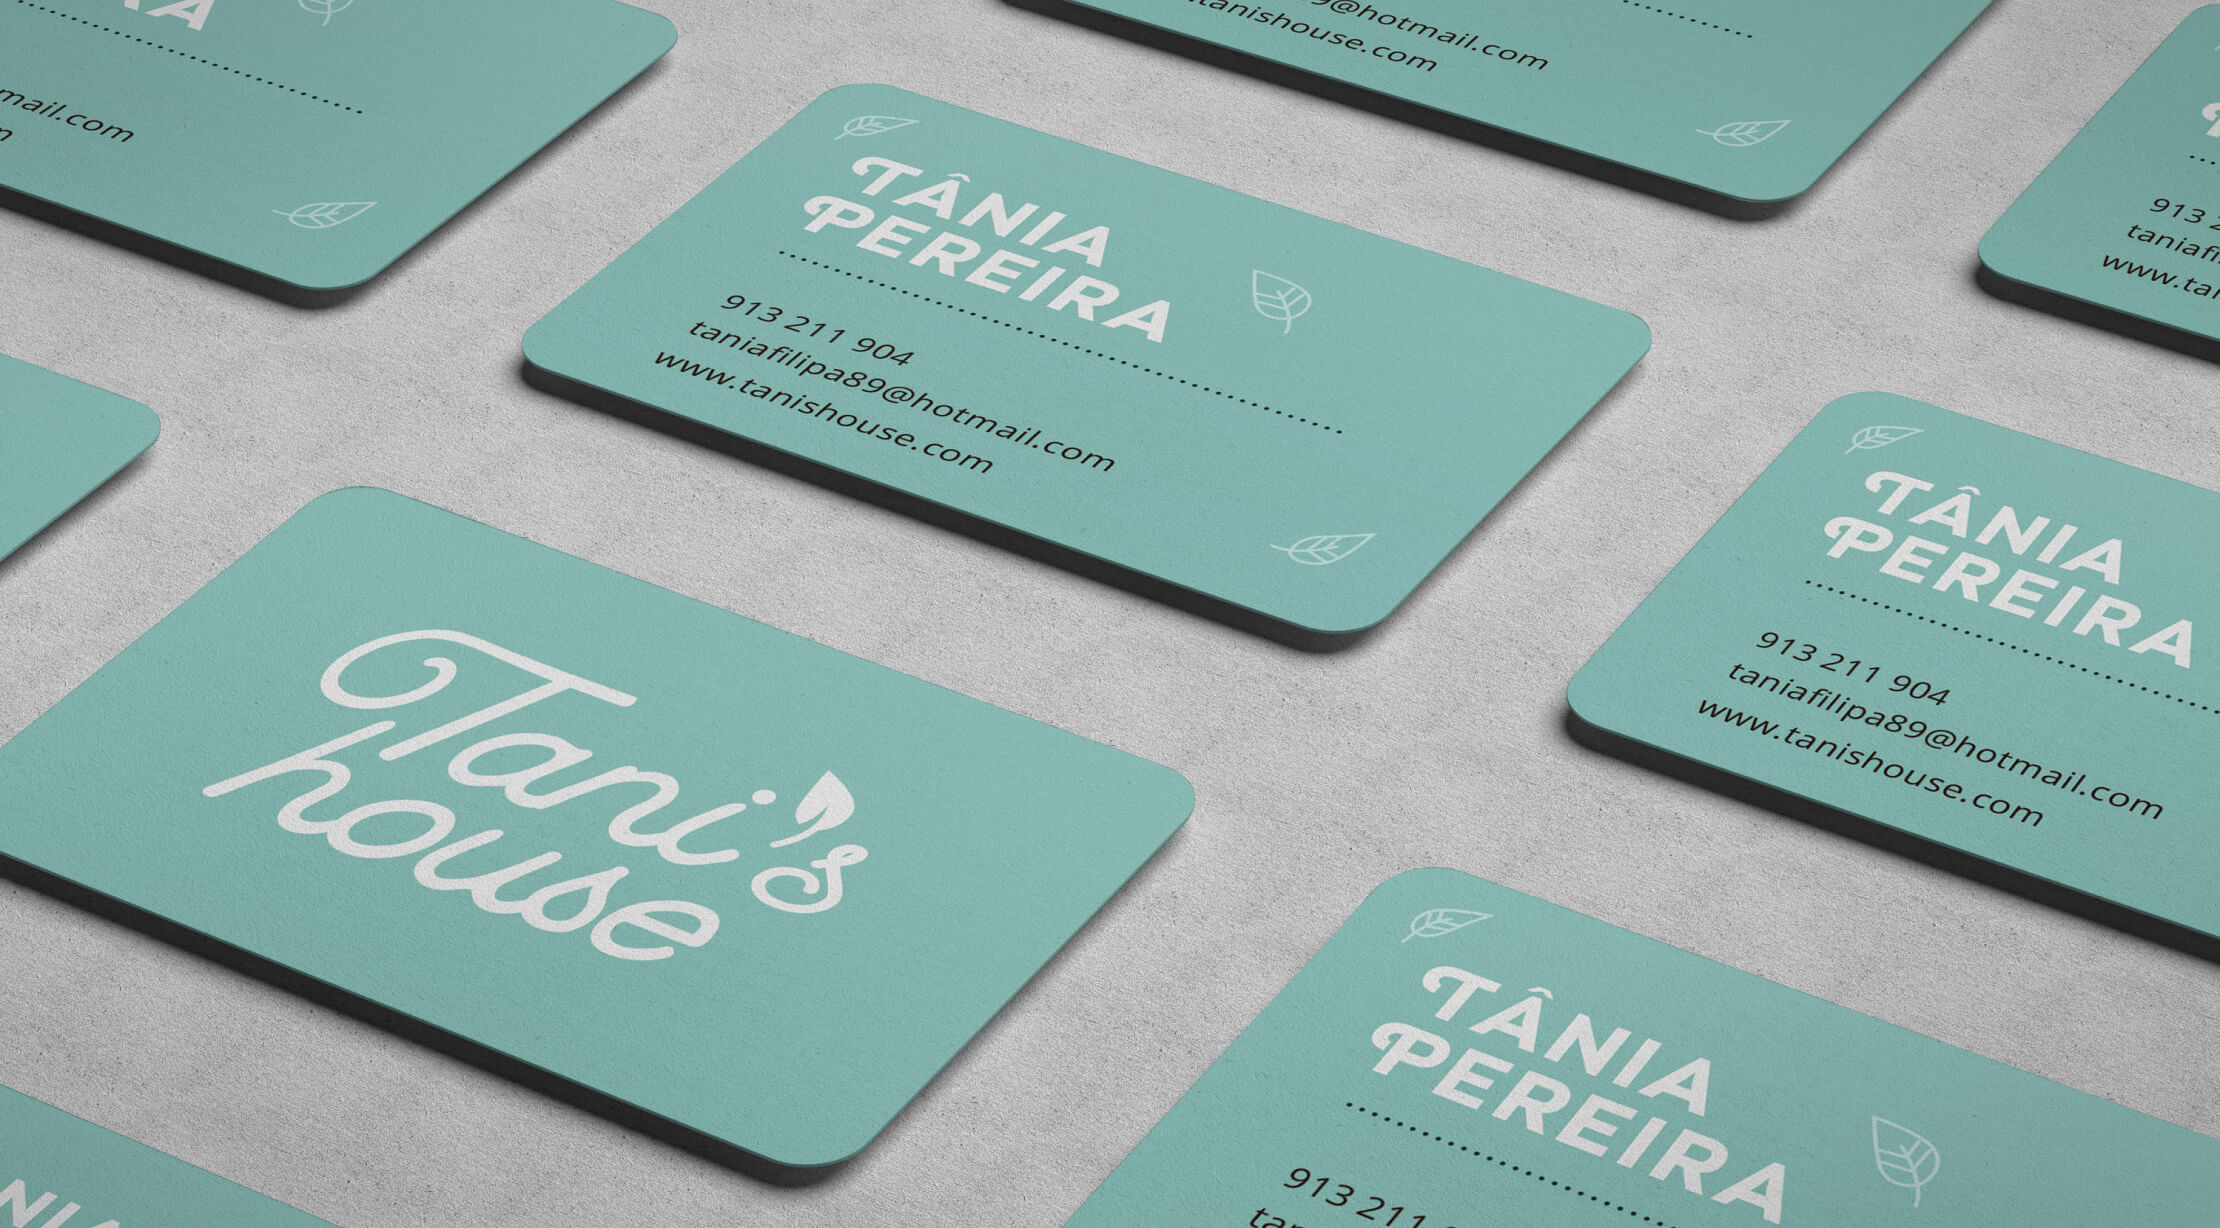 Tani's House business card